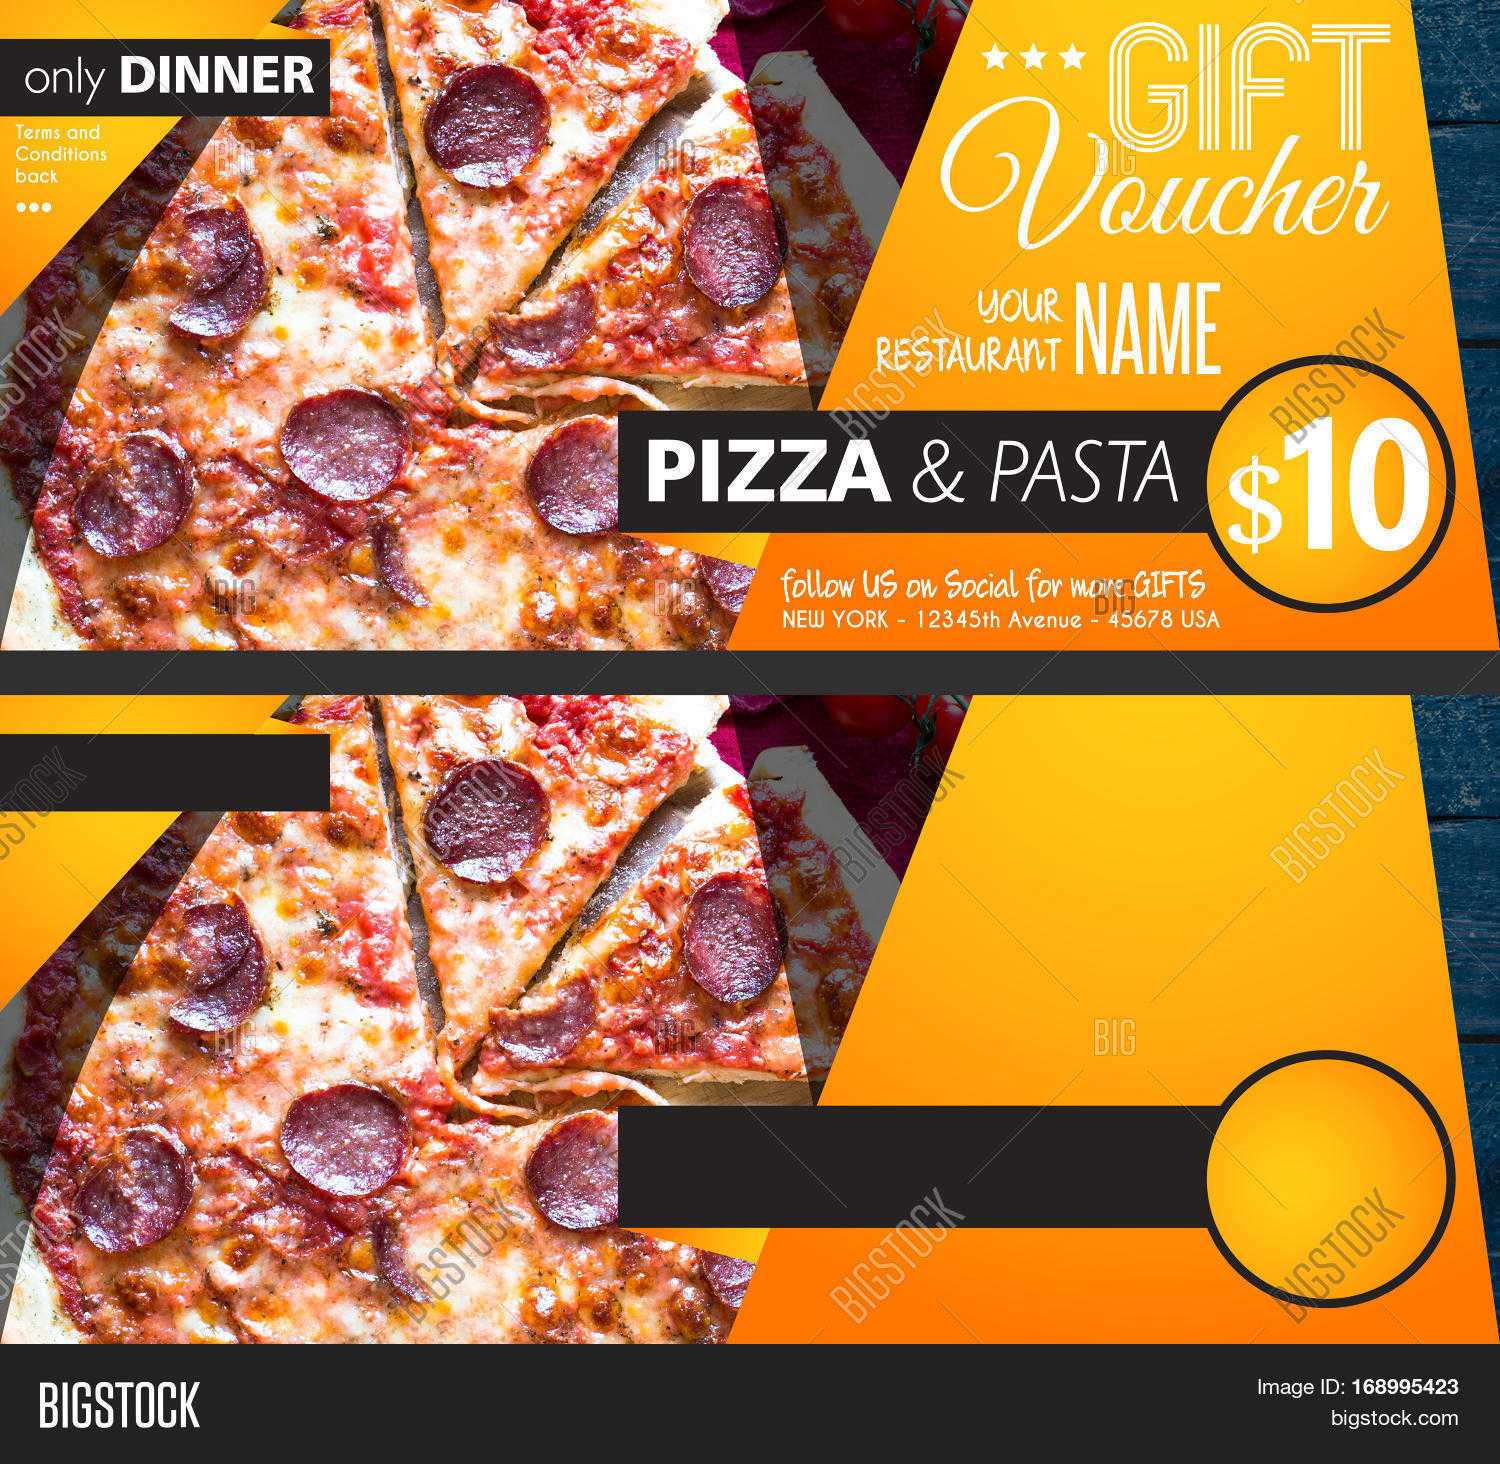 Restaurant Gift Image & Photo (Free Trial) | Bigstock Inside Pizza Gift Certificate Template